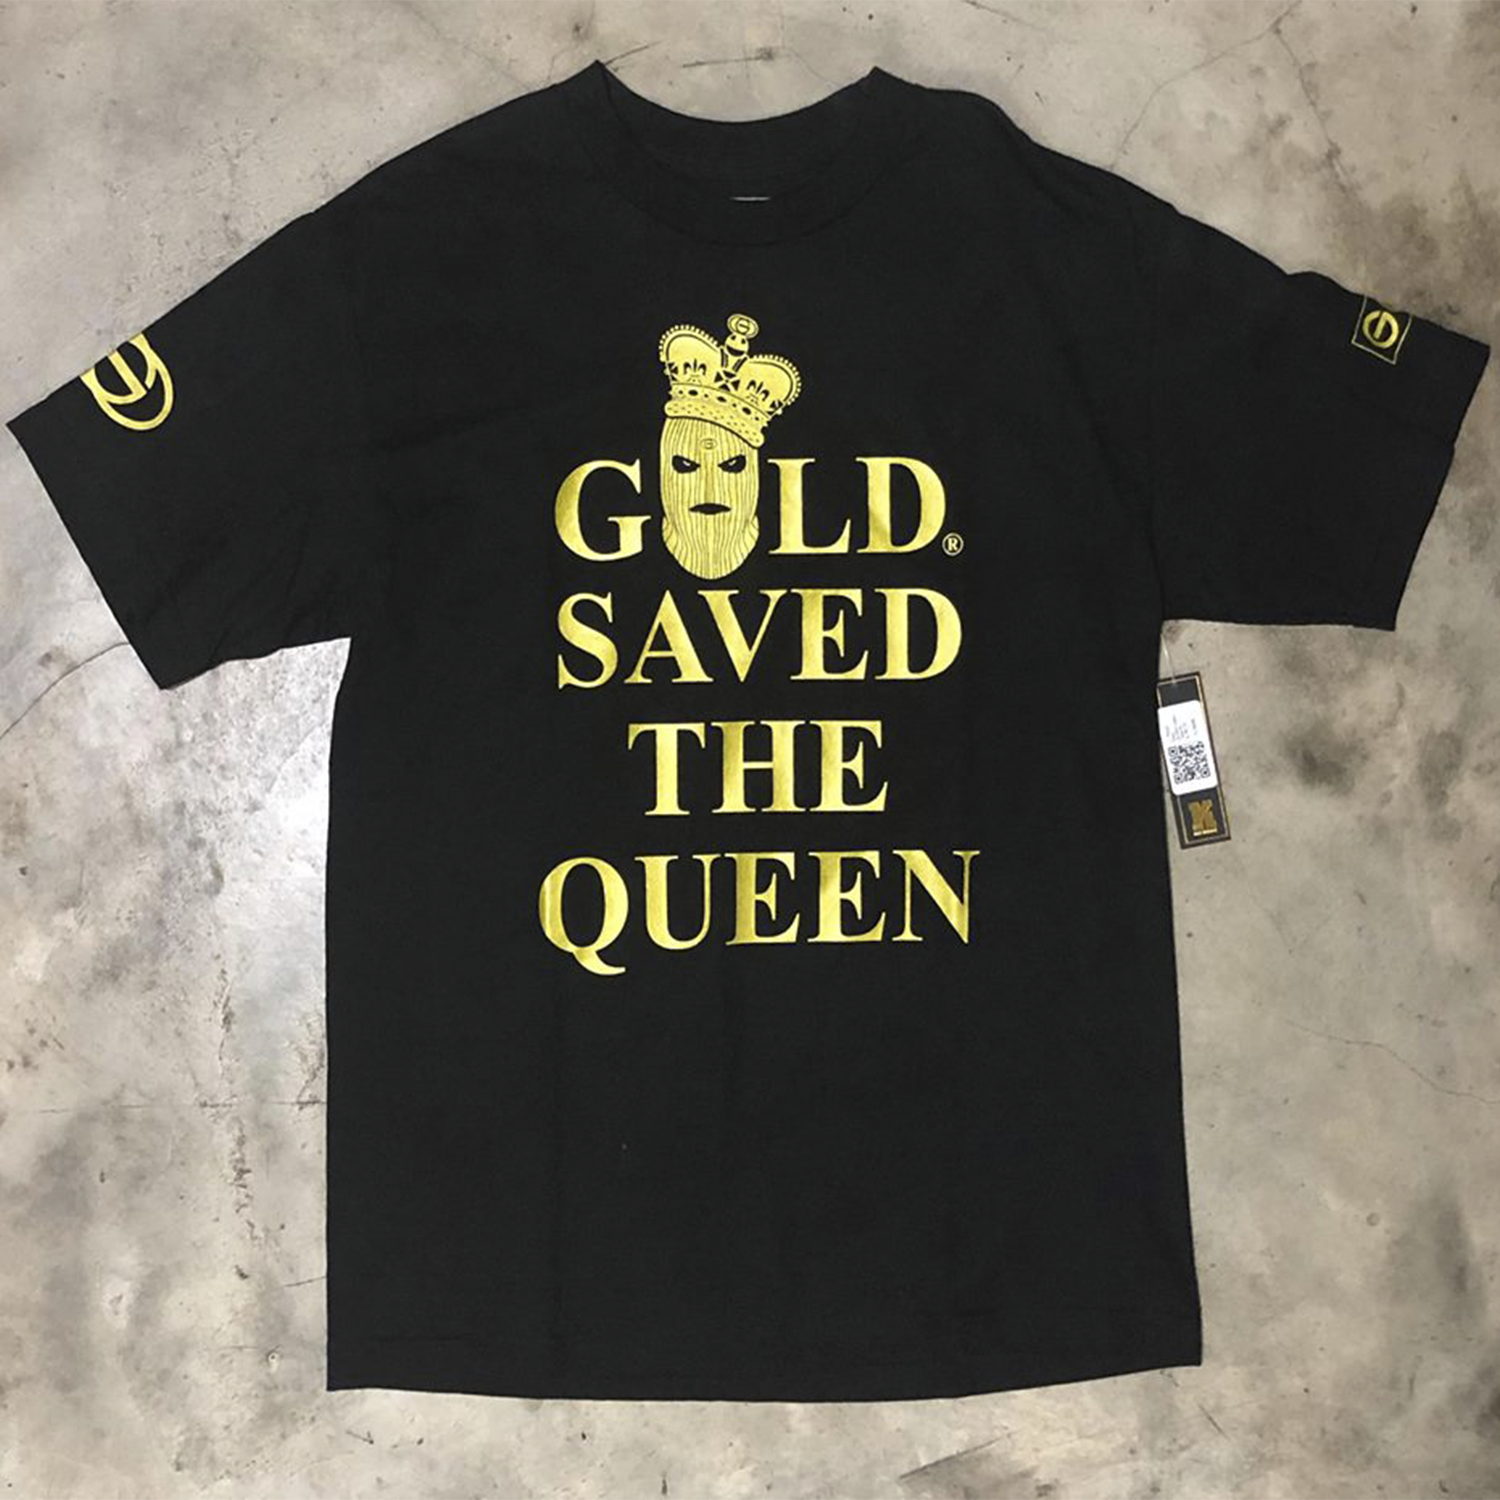 Polo Gold - Gold Saved The Queen